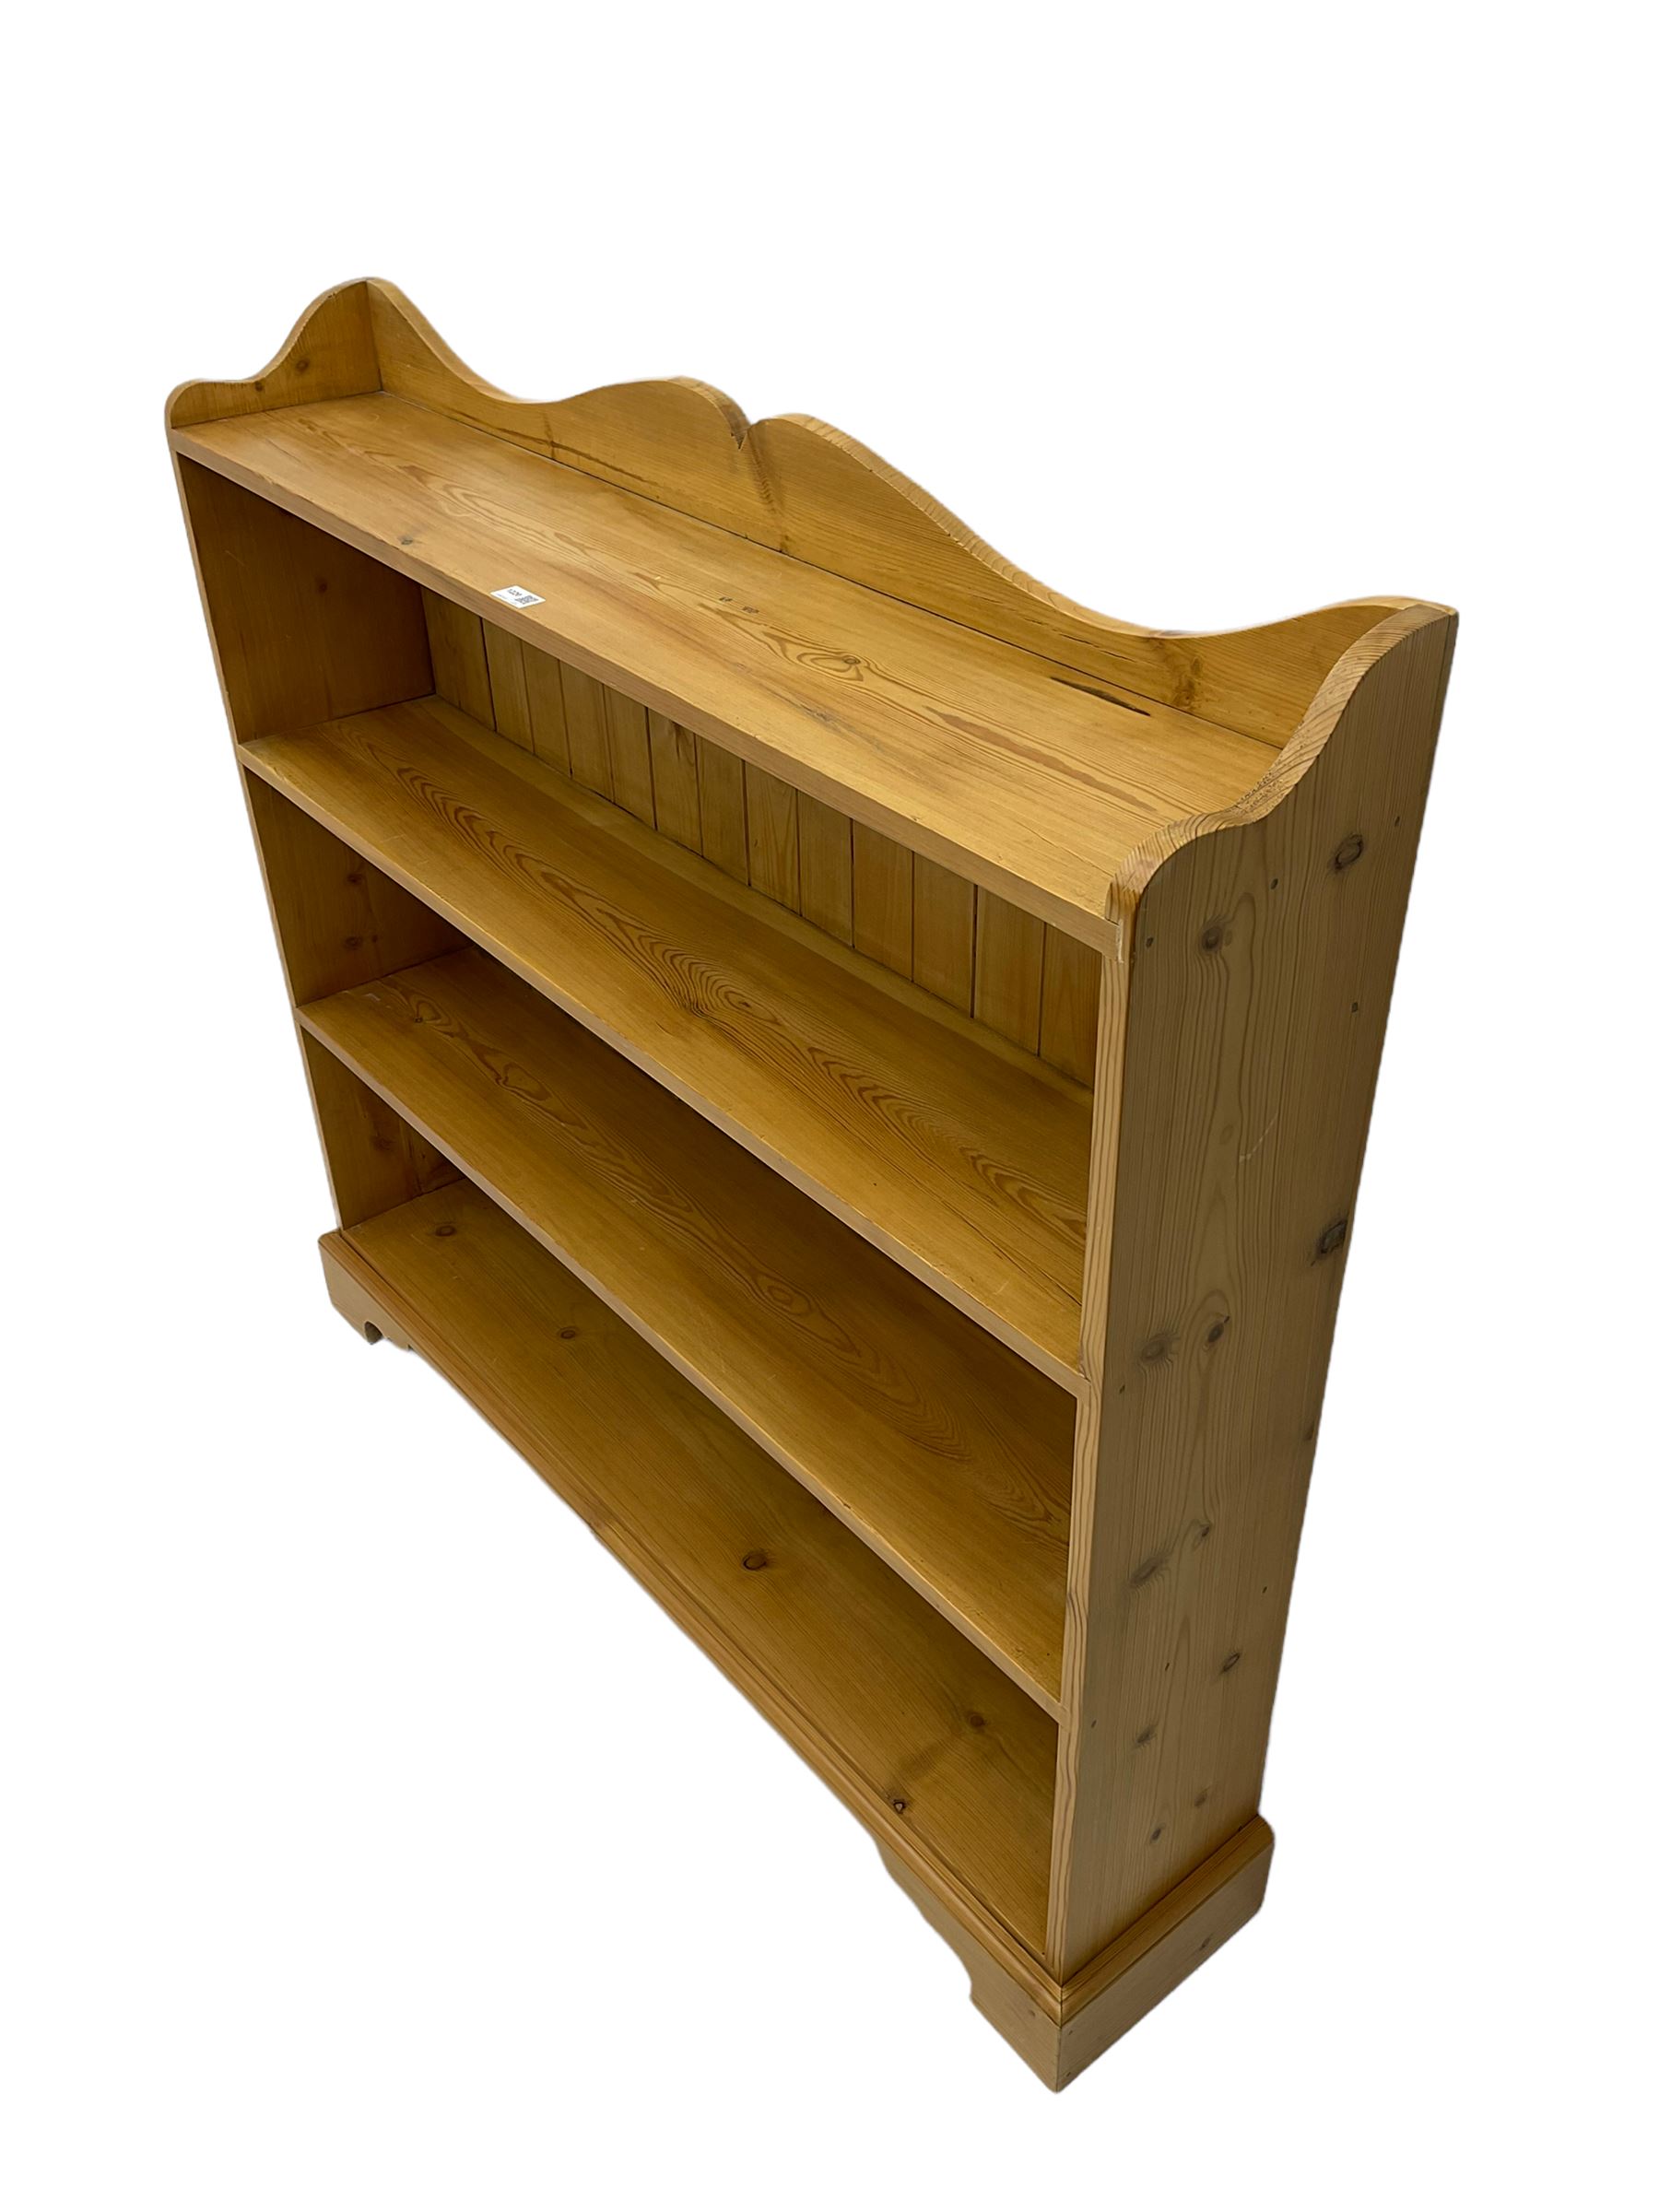 Waxed pine bookcase - Image 4 of 6